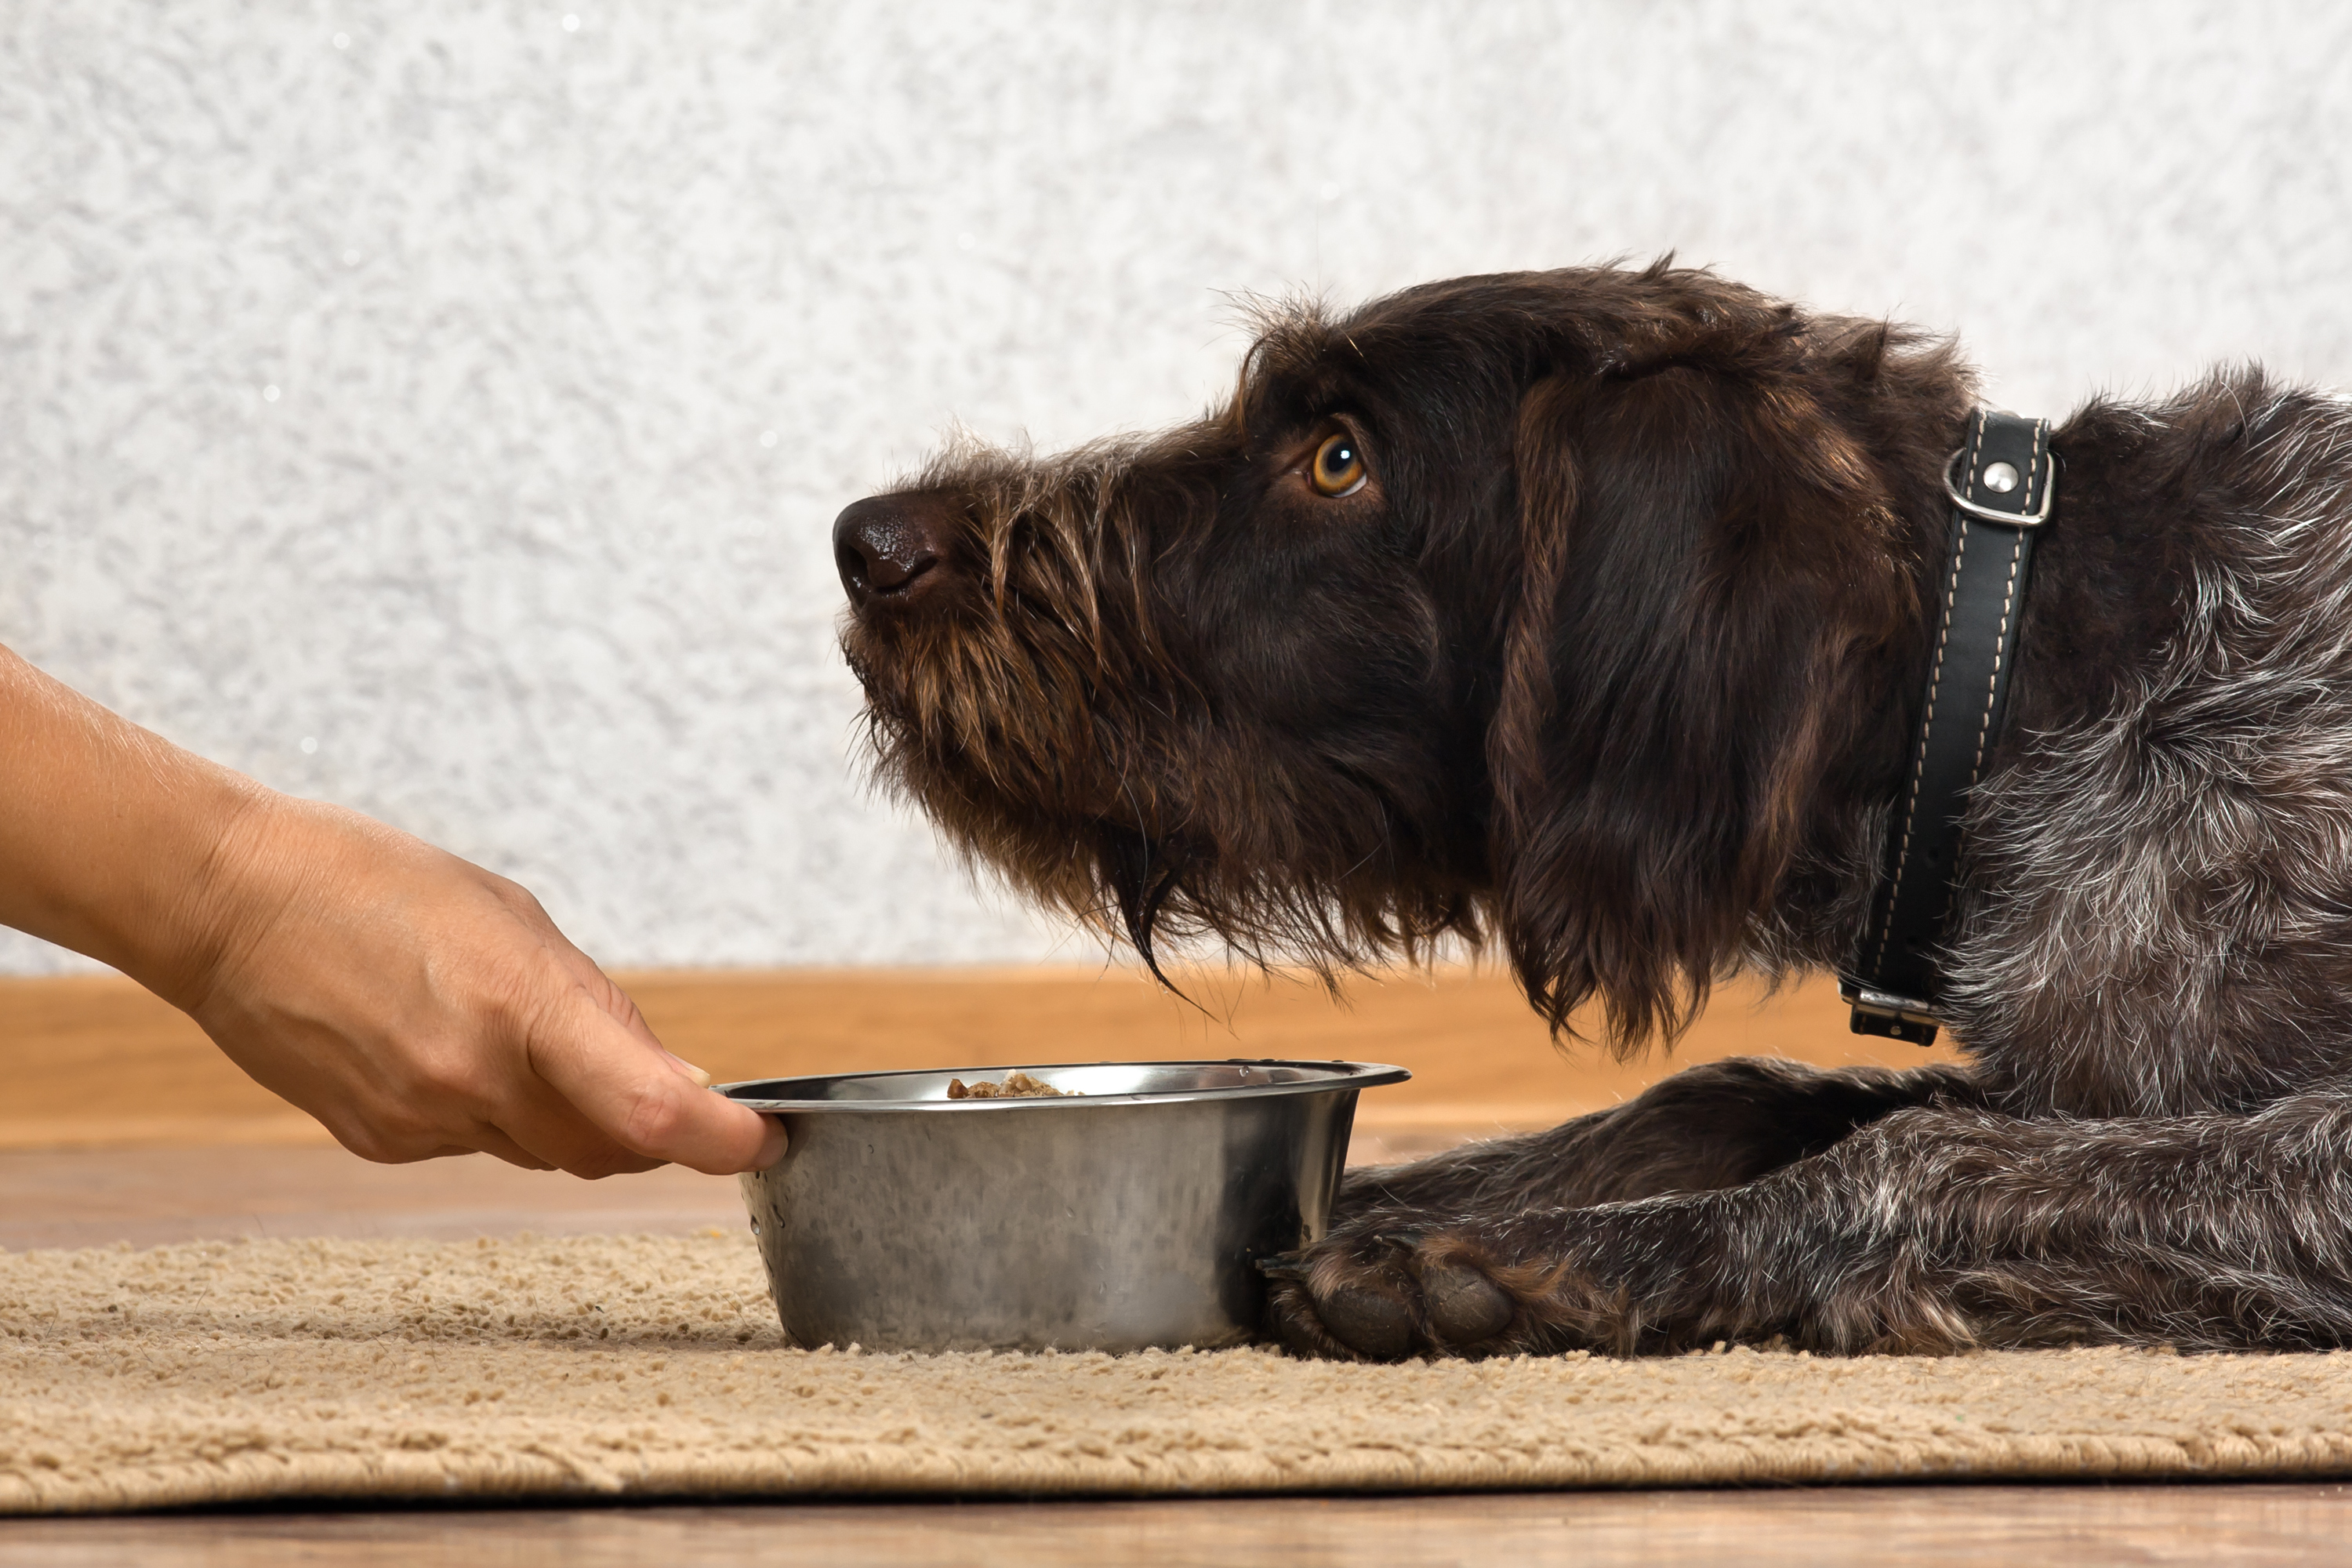 Only Way Senior Dog Will Eat Dinner Has Internet in Hysterics